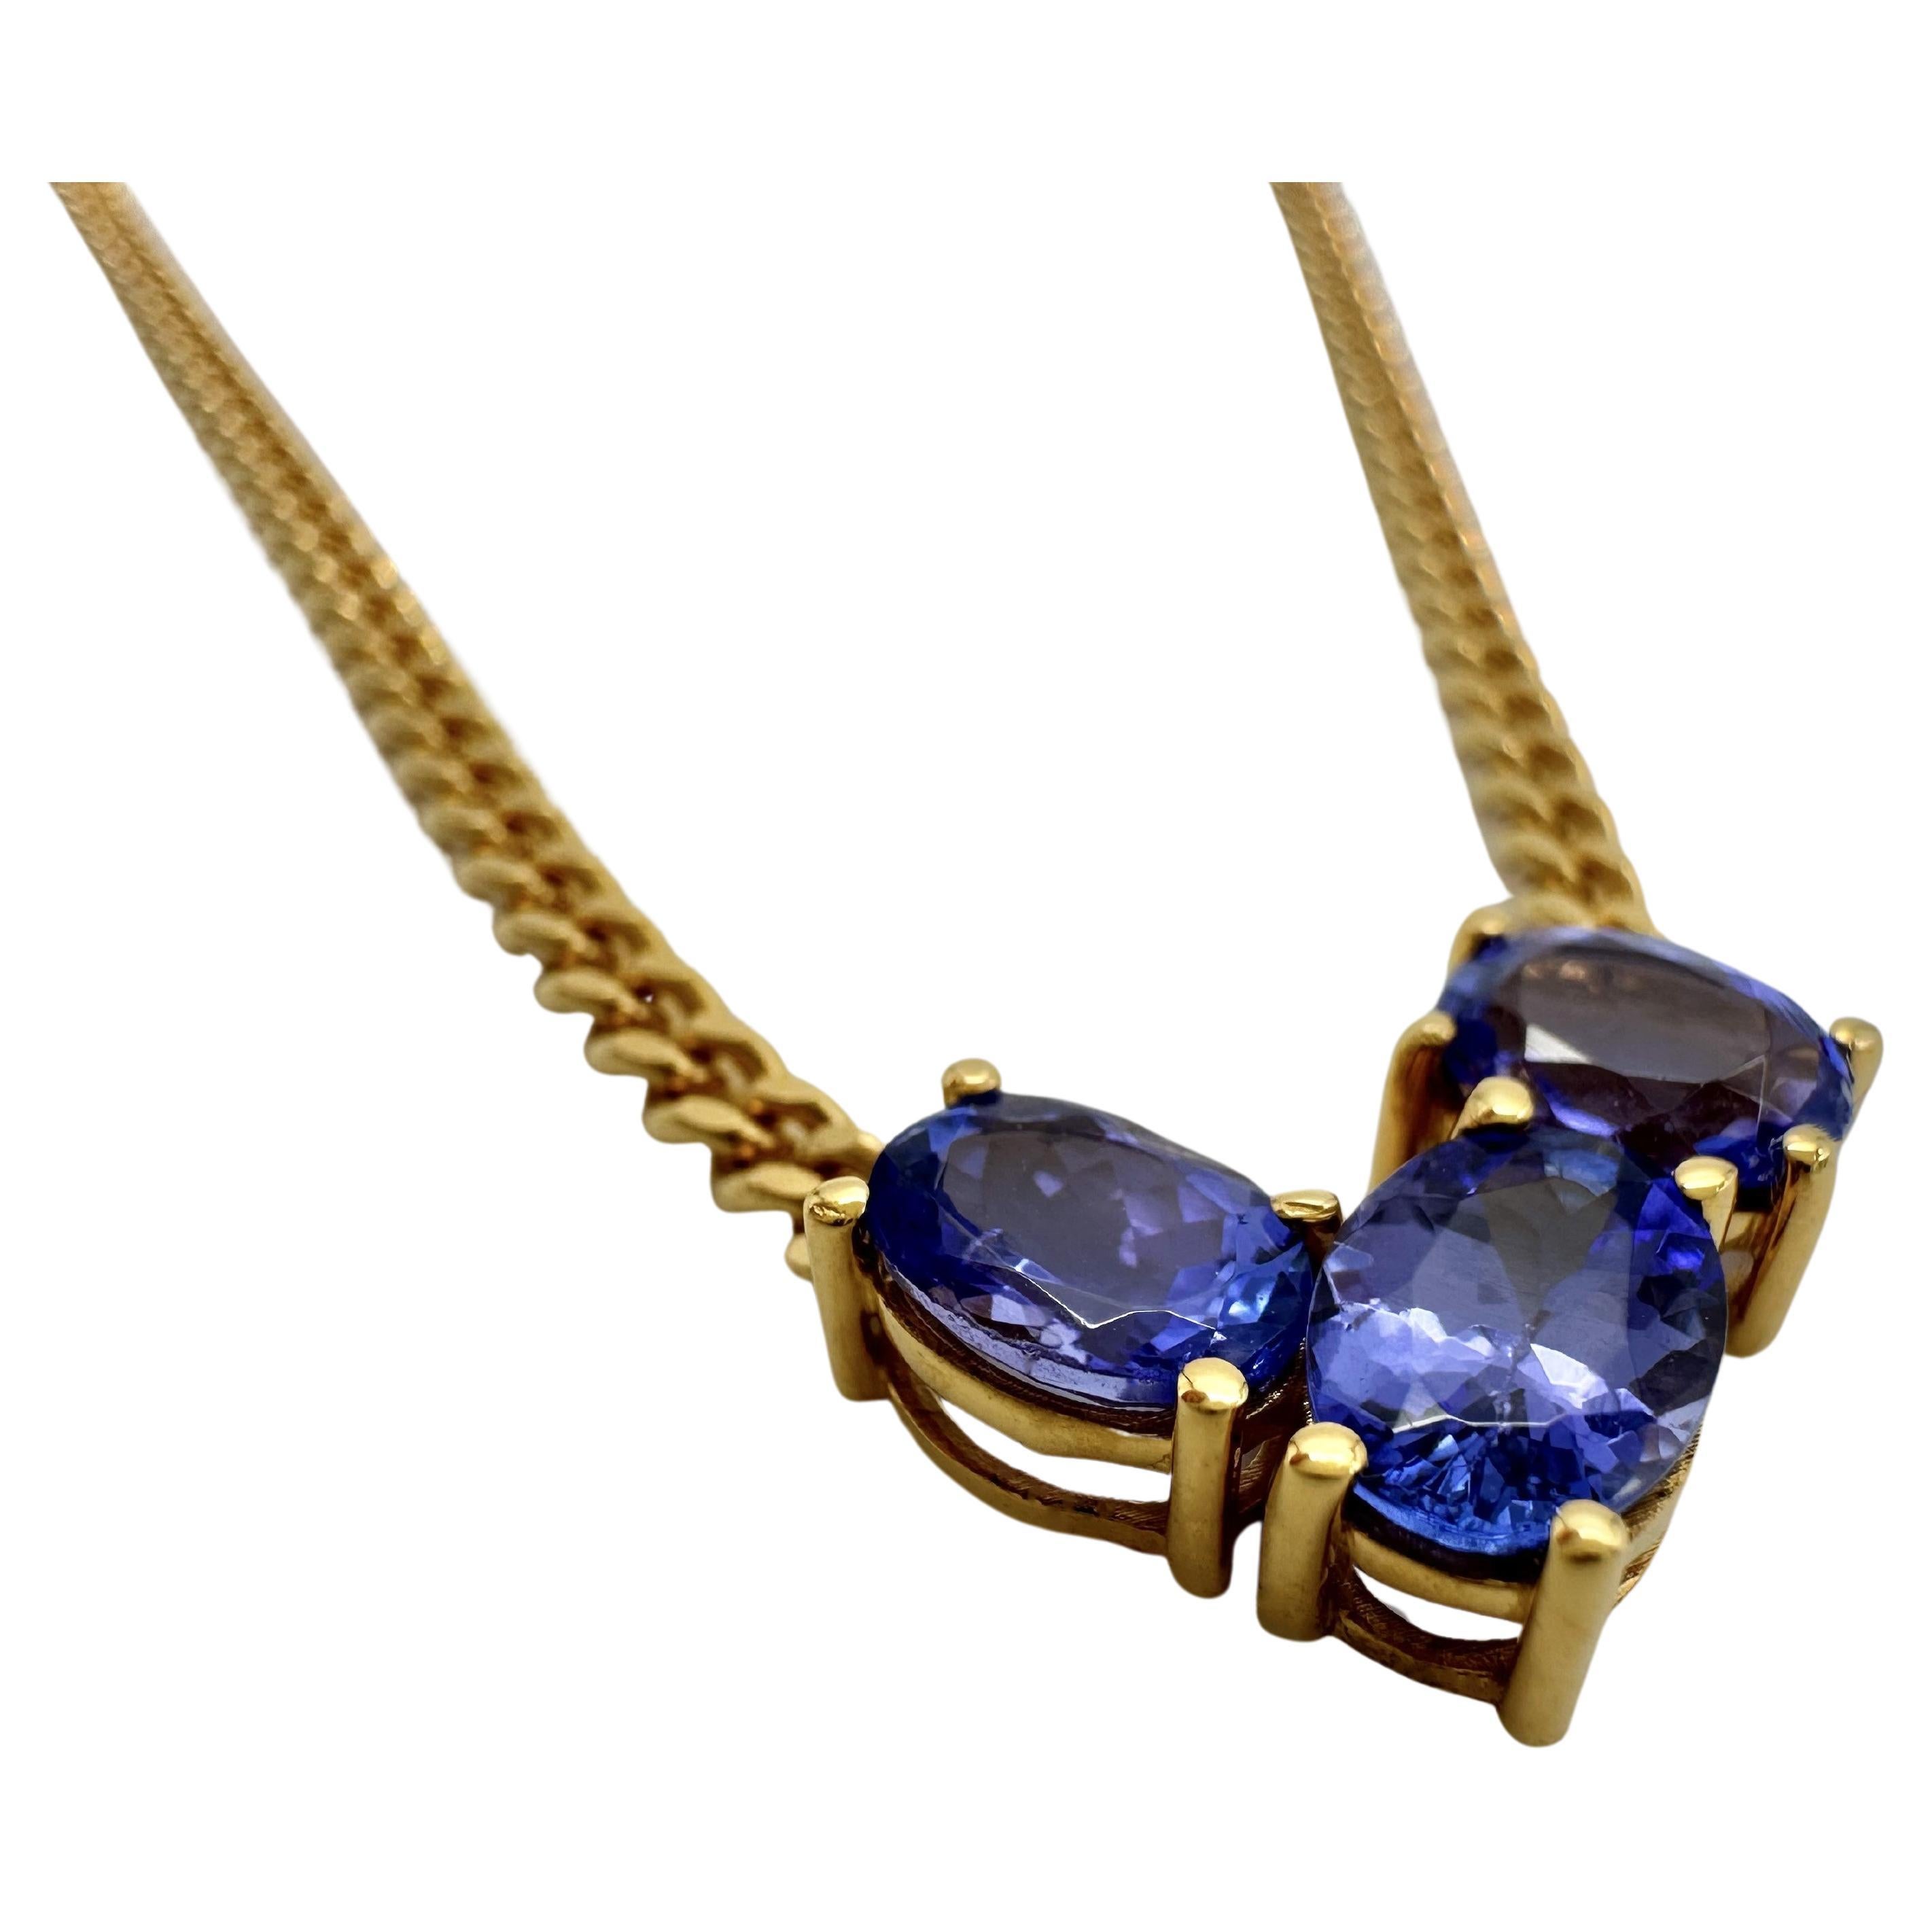 Necklace in 19.2 carat gold and 0.52 carat Tanzanite